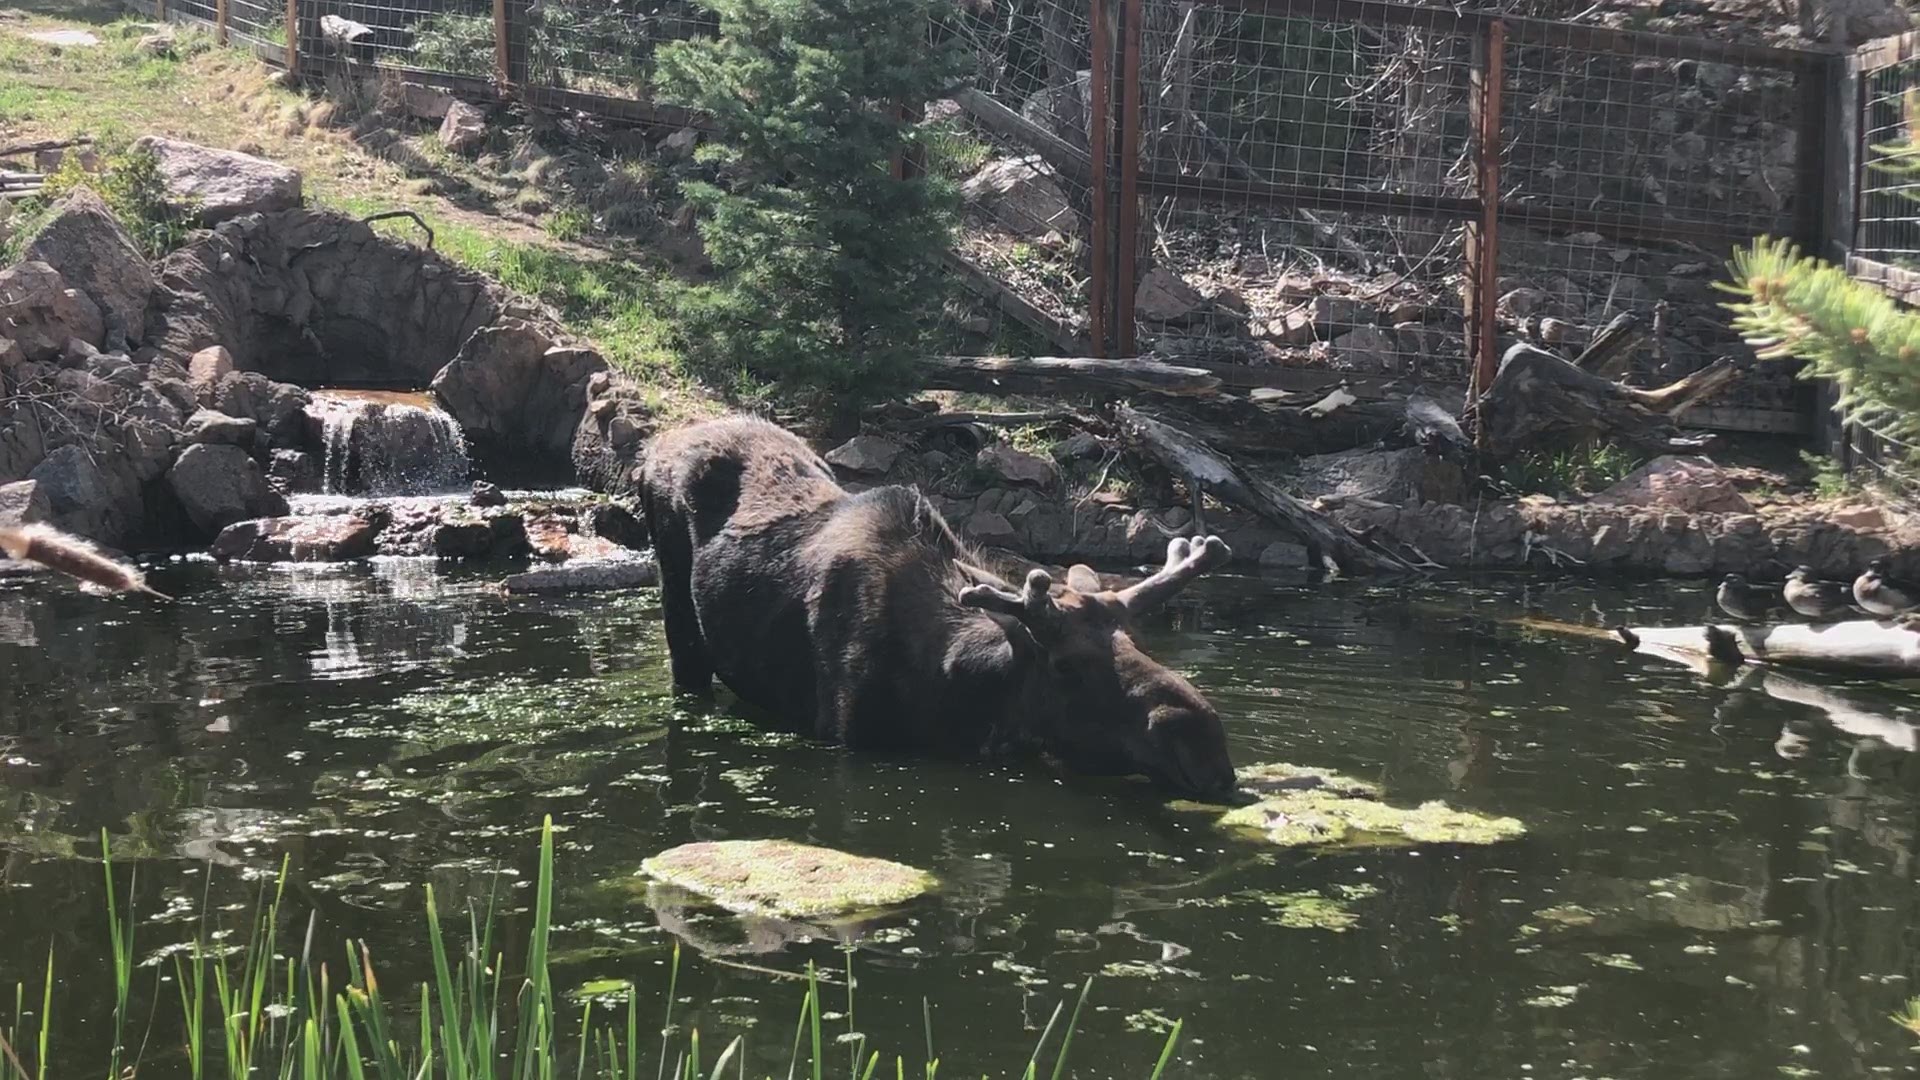 Staff at the Cheyenne Mountain Zoo said goodbye to a beloved moose named Tahoma last weekend. (Video courtesy Cheyenne Mountain Zoo.)